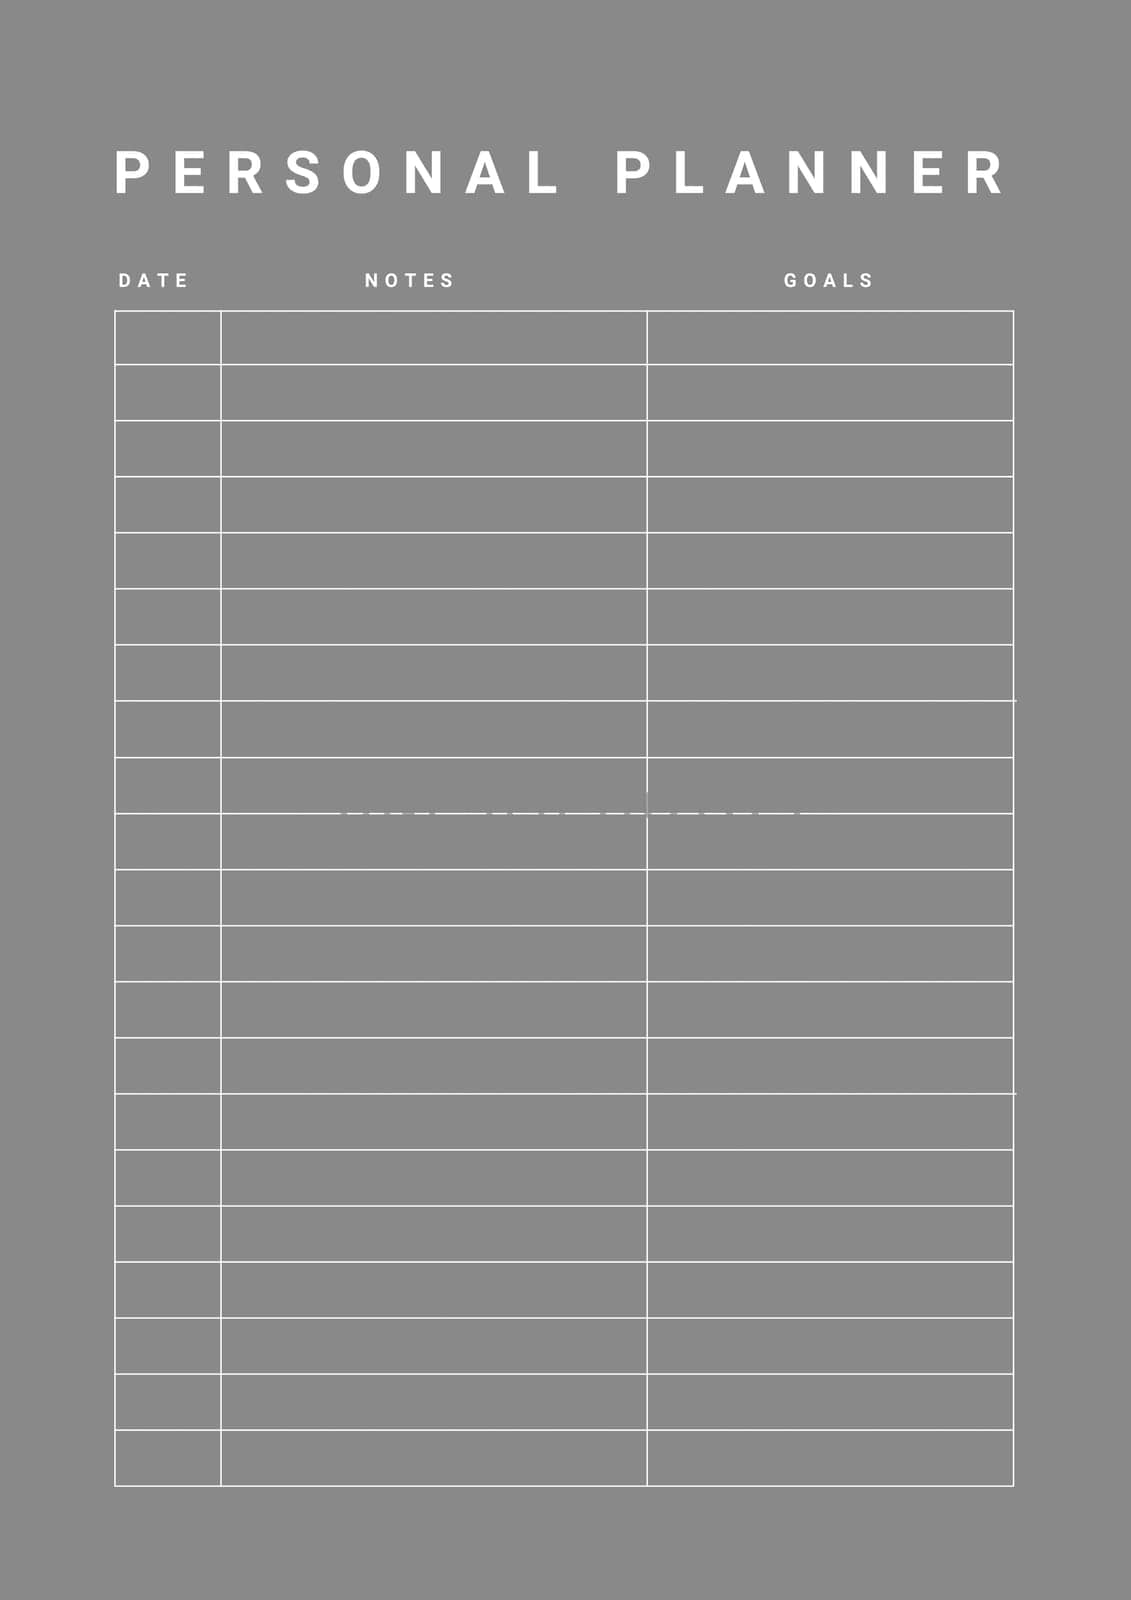 Notebook pages for notes and reminder. planner page template. Modern Business organizer. Weekly schedule page.